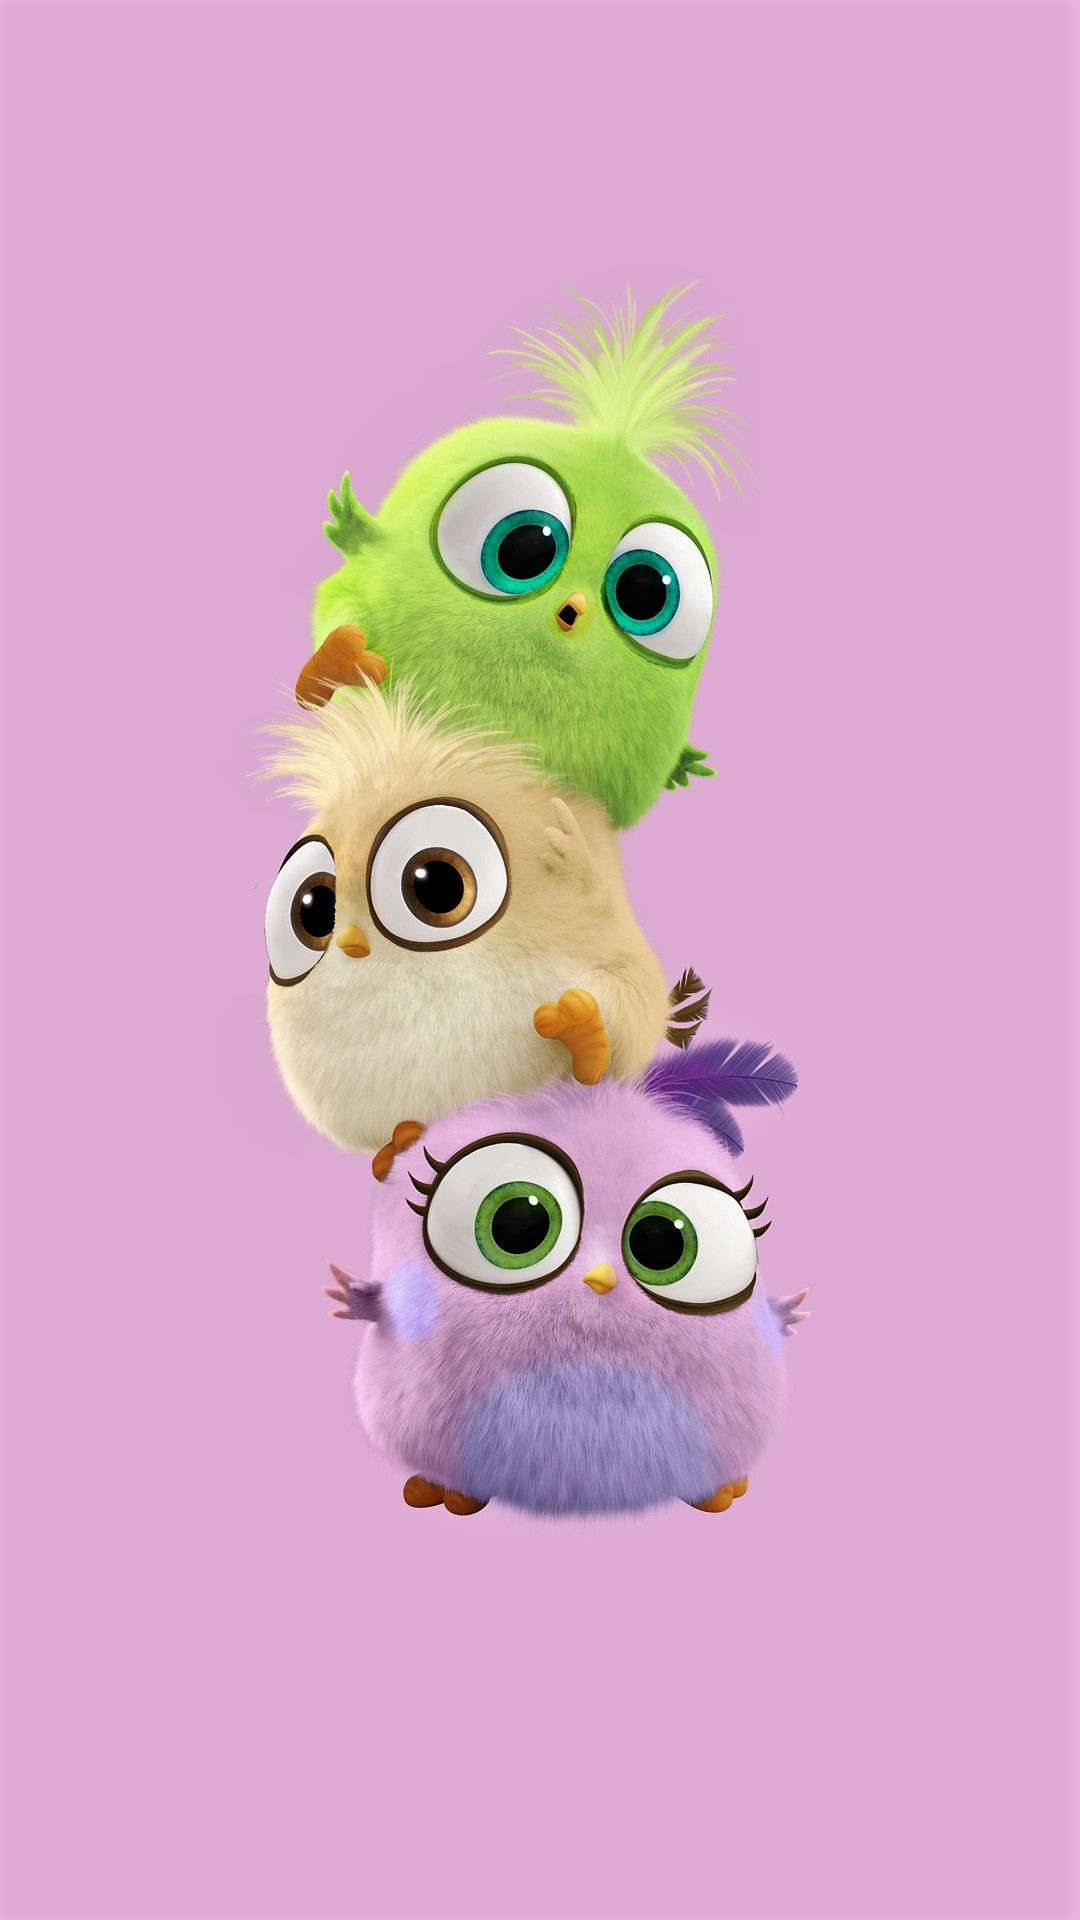 hd wallpapers for mobile phones,cartoon,owl,purple,animation,pink